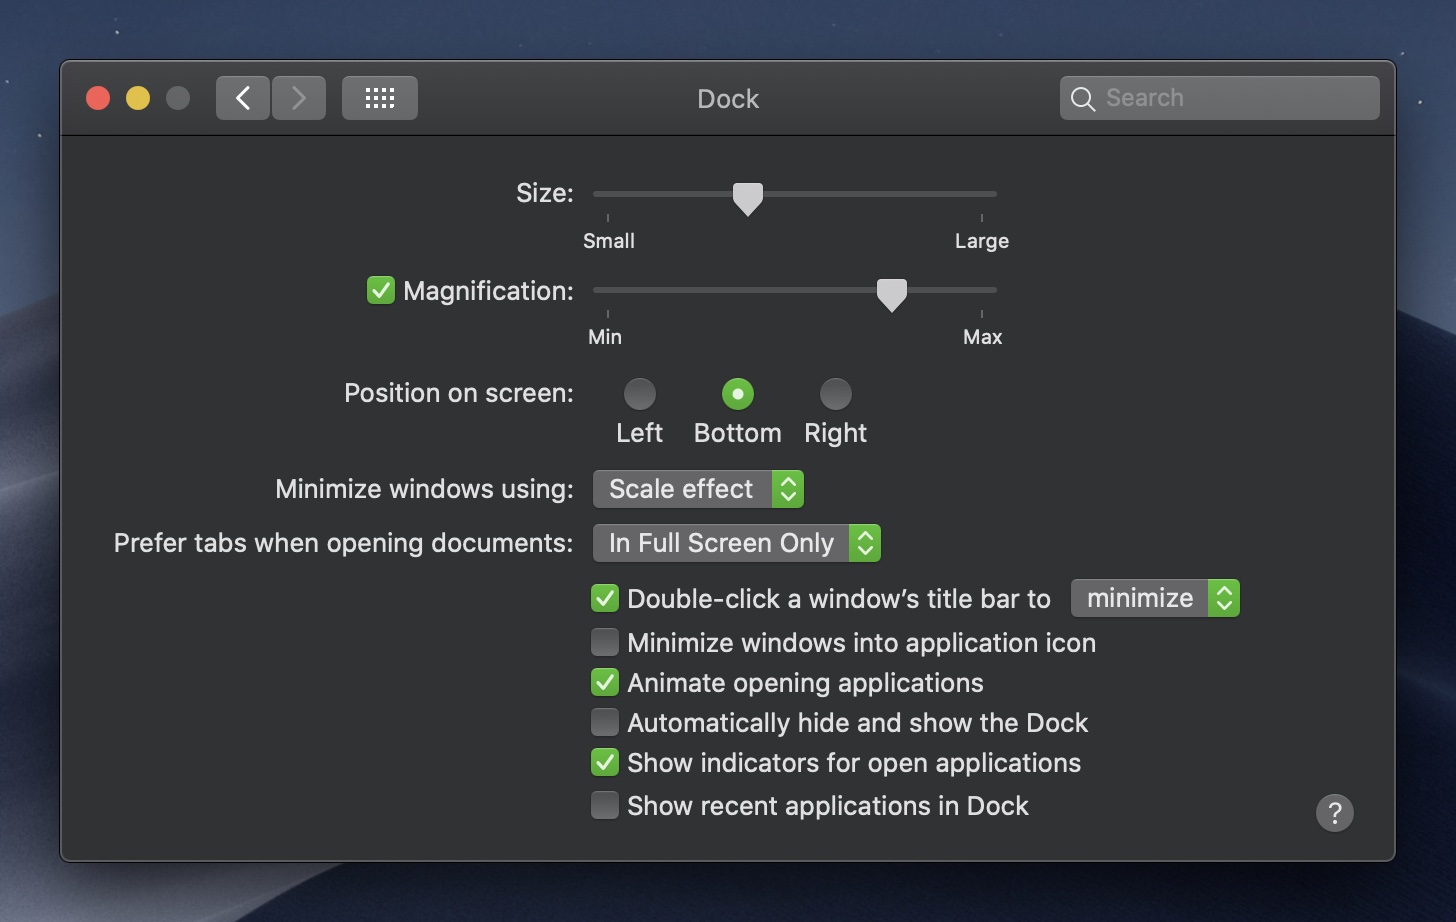 Dock settings in System Preferences in Mojave (dark mode, green accents)